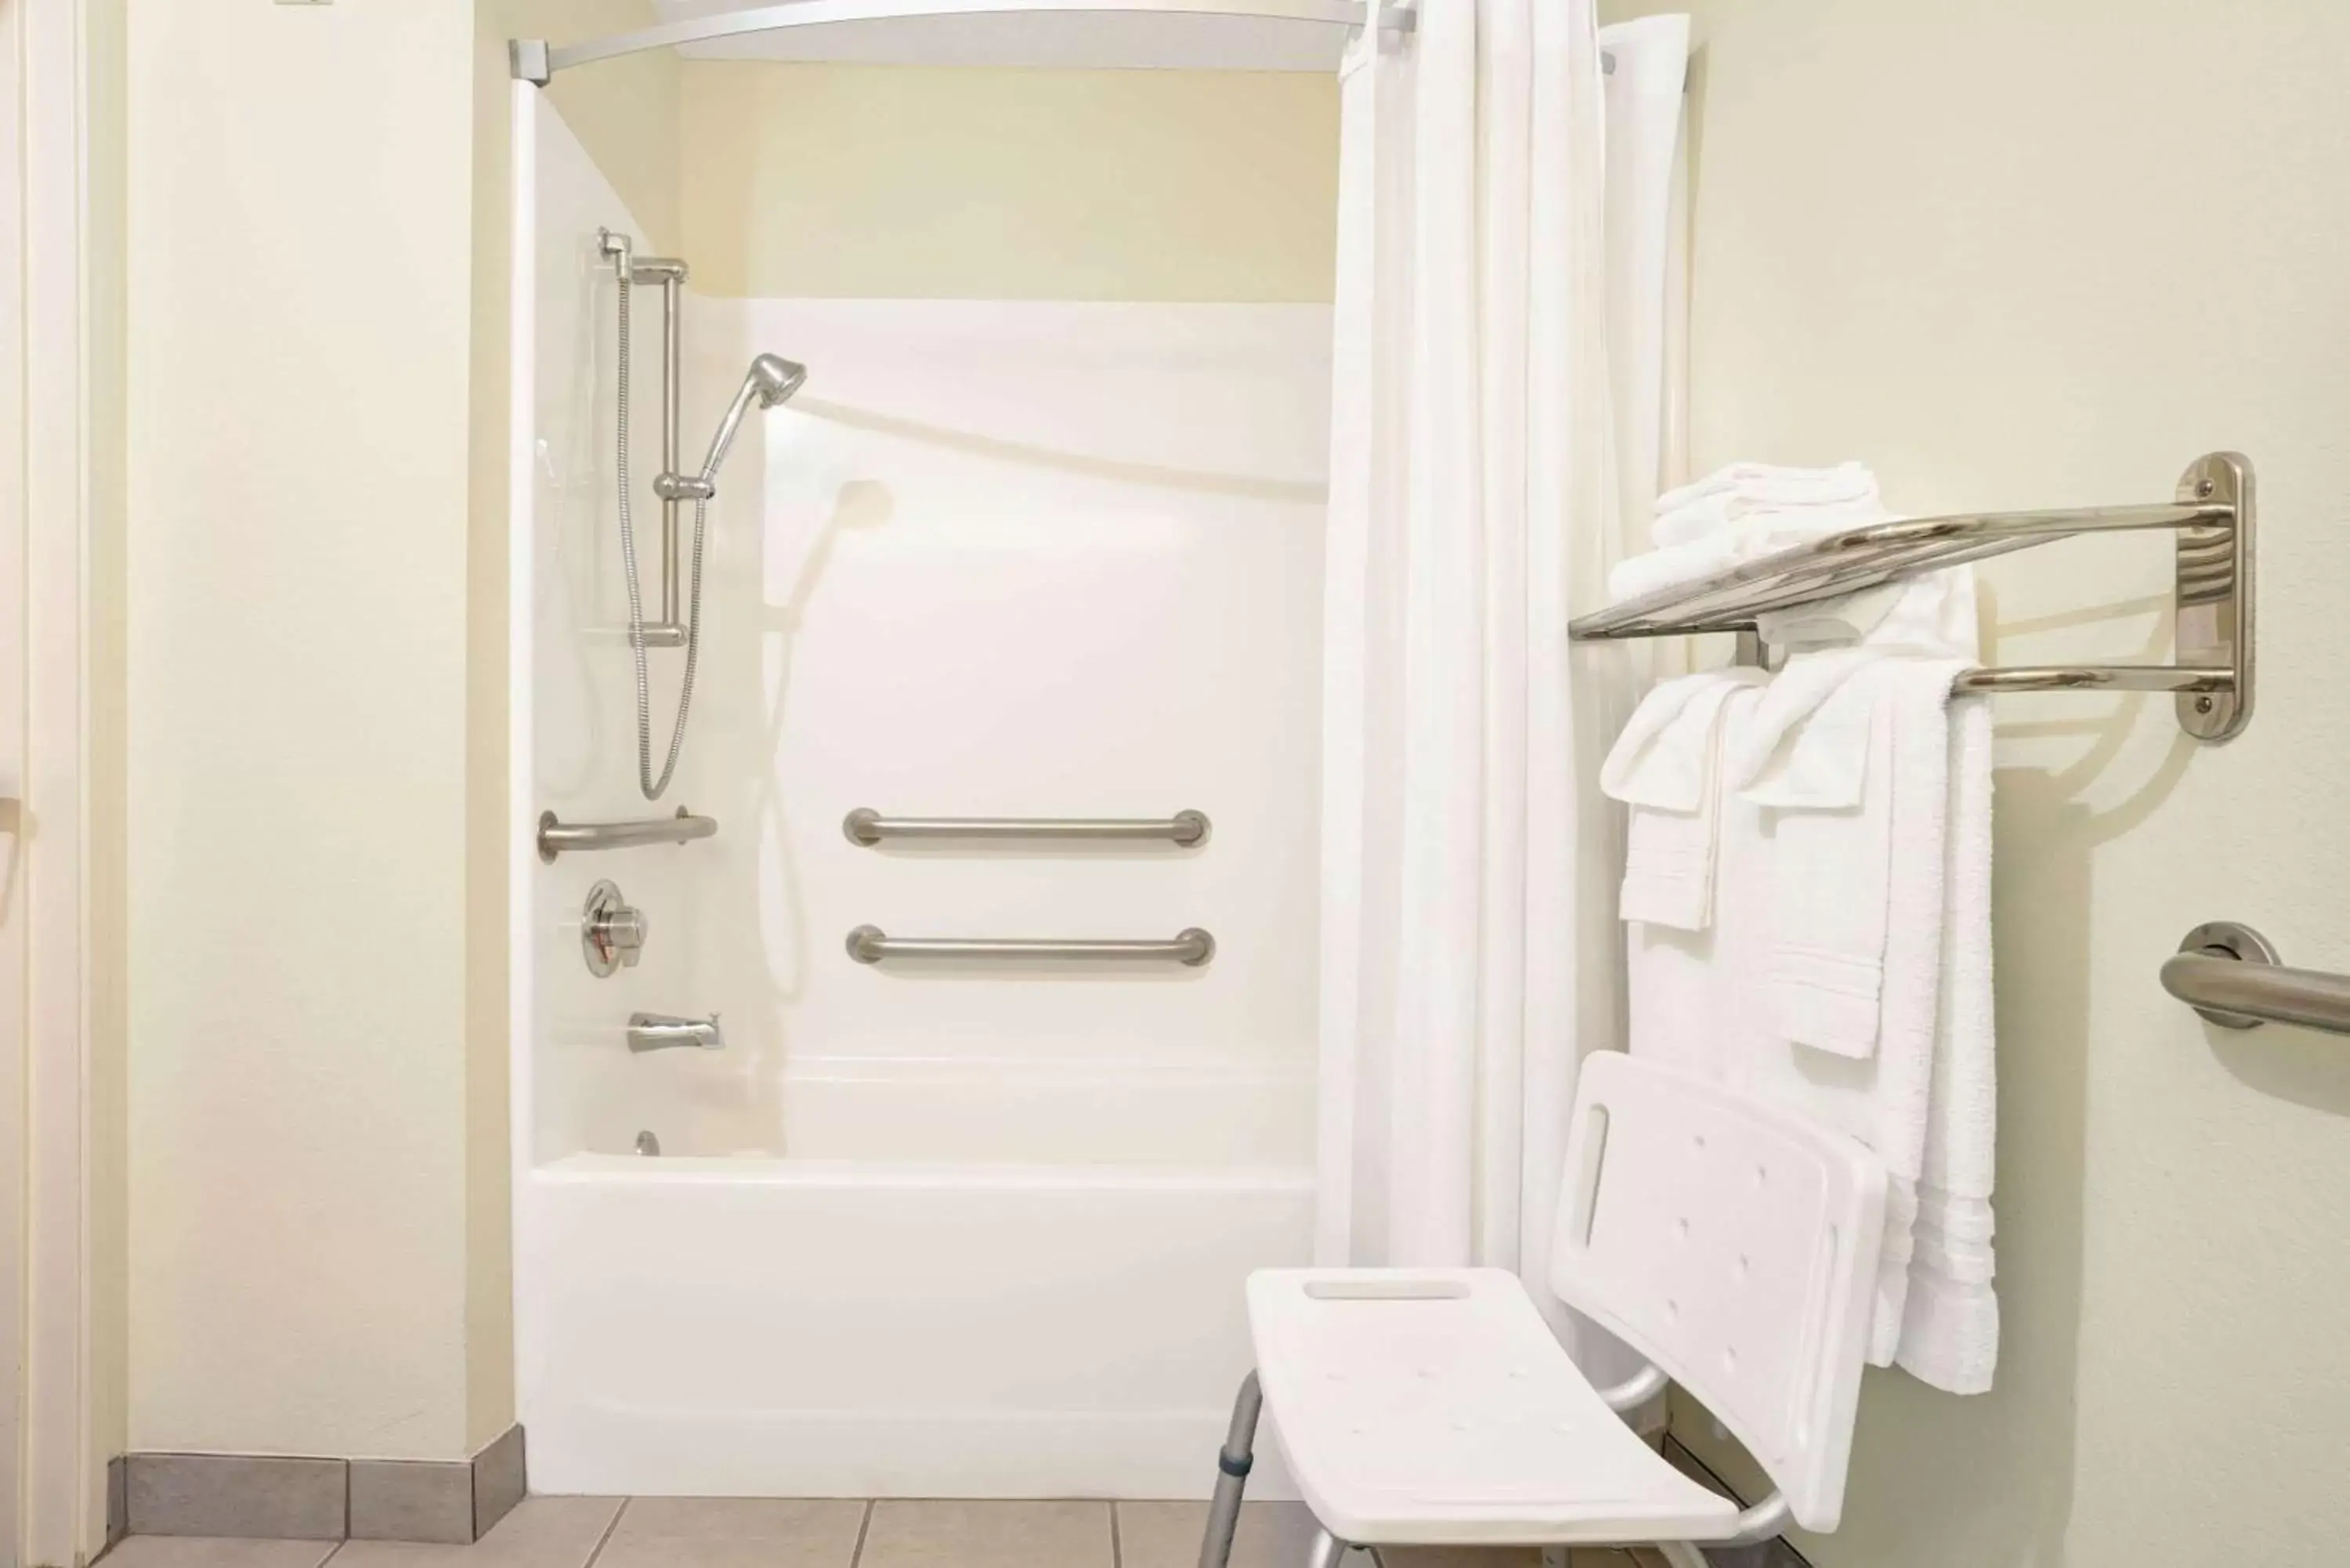 Bathroom in Microtel Inn and Suites - Inver Grove Heights